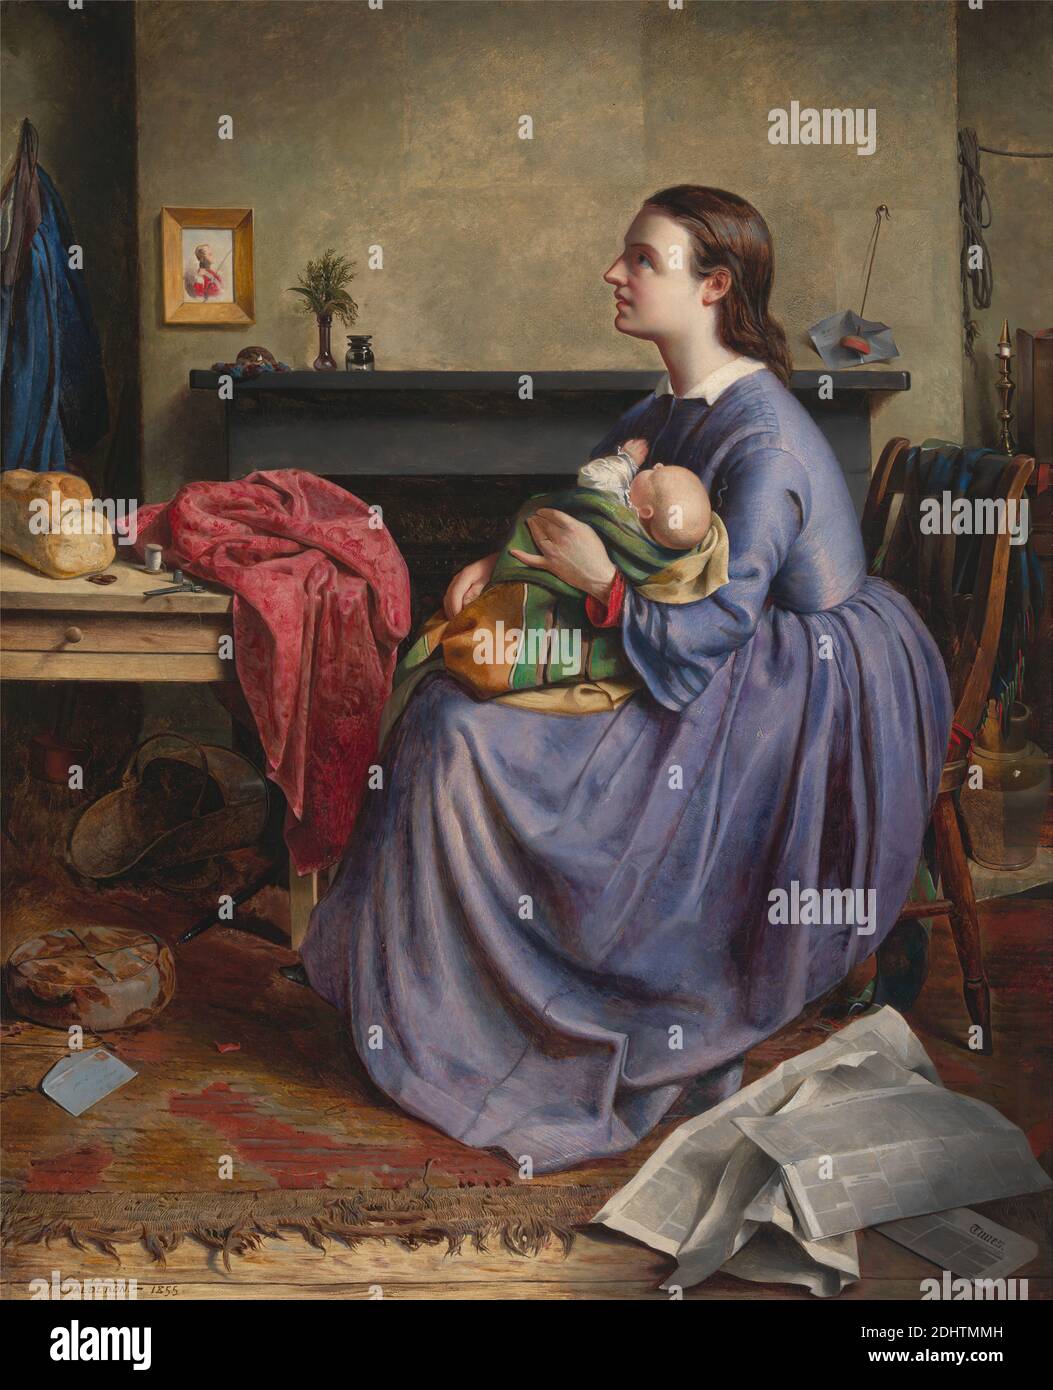 Lord, Thy Will Be Done', Philip Hermogenes Calderon, 1833–1898, British, 1855, Oil on canvas, Support (PTG): 10 1/8 × 18 1/4 inches (25.7 × 46.4 cm), baby, blue, bread, chair, children, Crimean War (Oct 1853 - Feb 1856), fireplace, food, gaze, genre subject, letter, mother, newspaper, painting (visual work), portrait, poverty, scissors, seamstress, shell, soldier, table Stock Photo